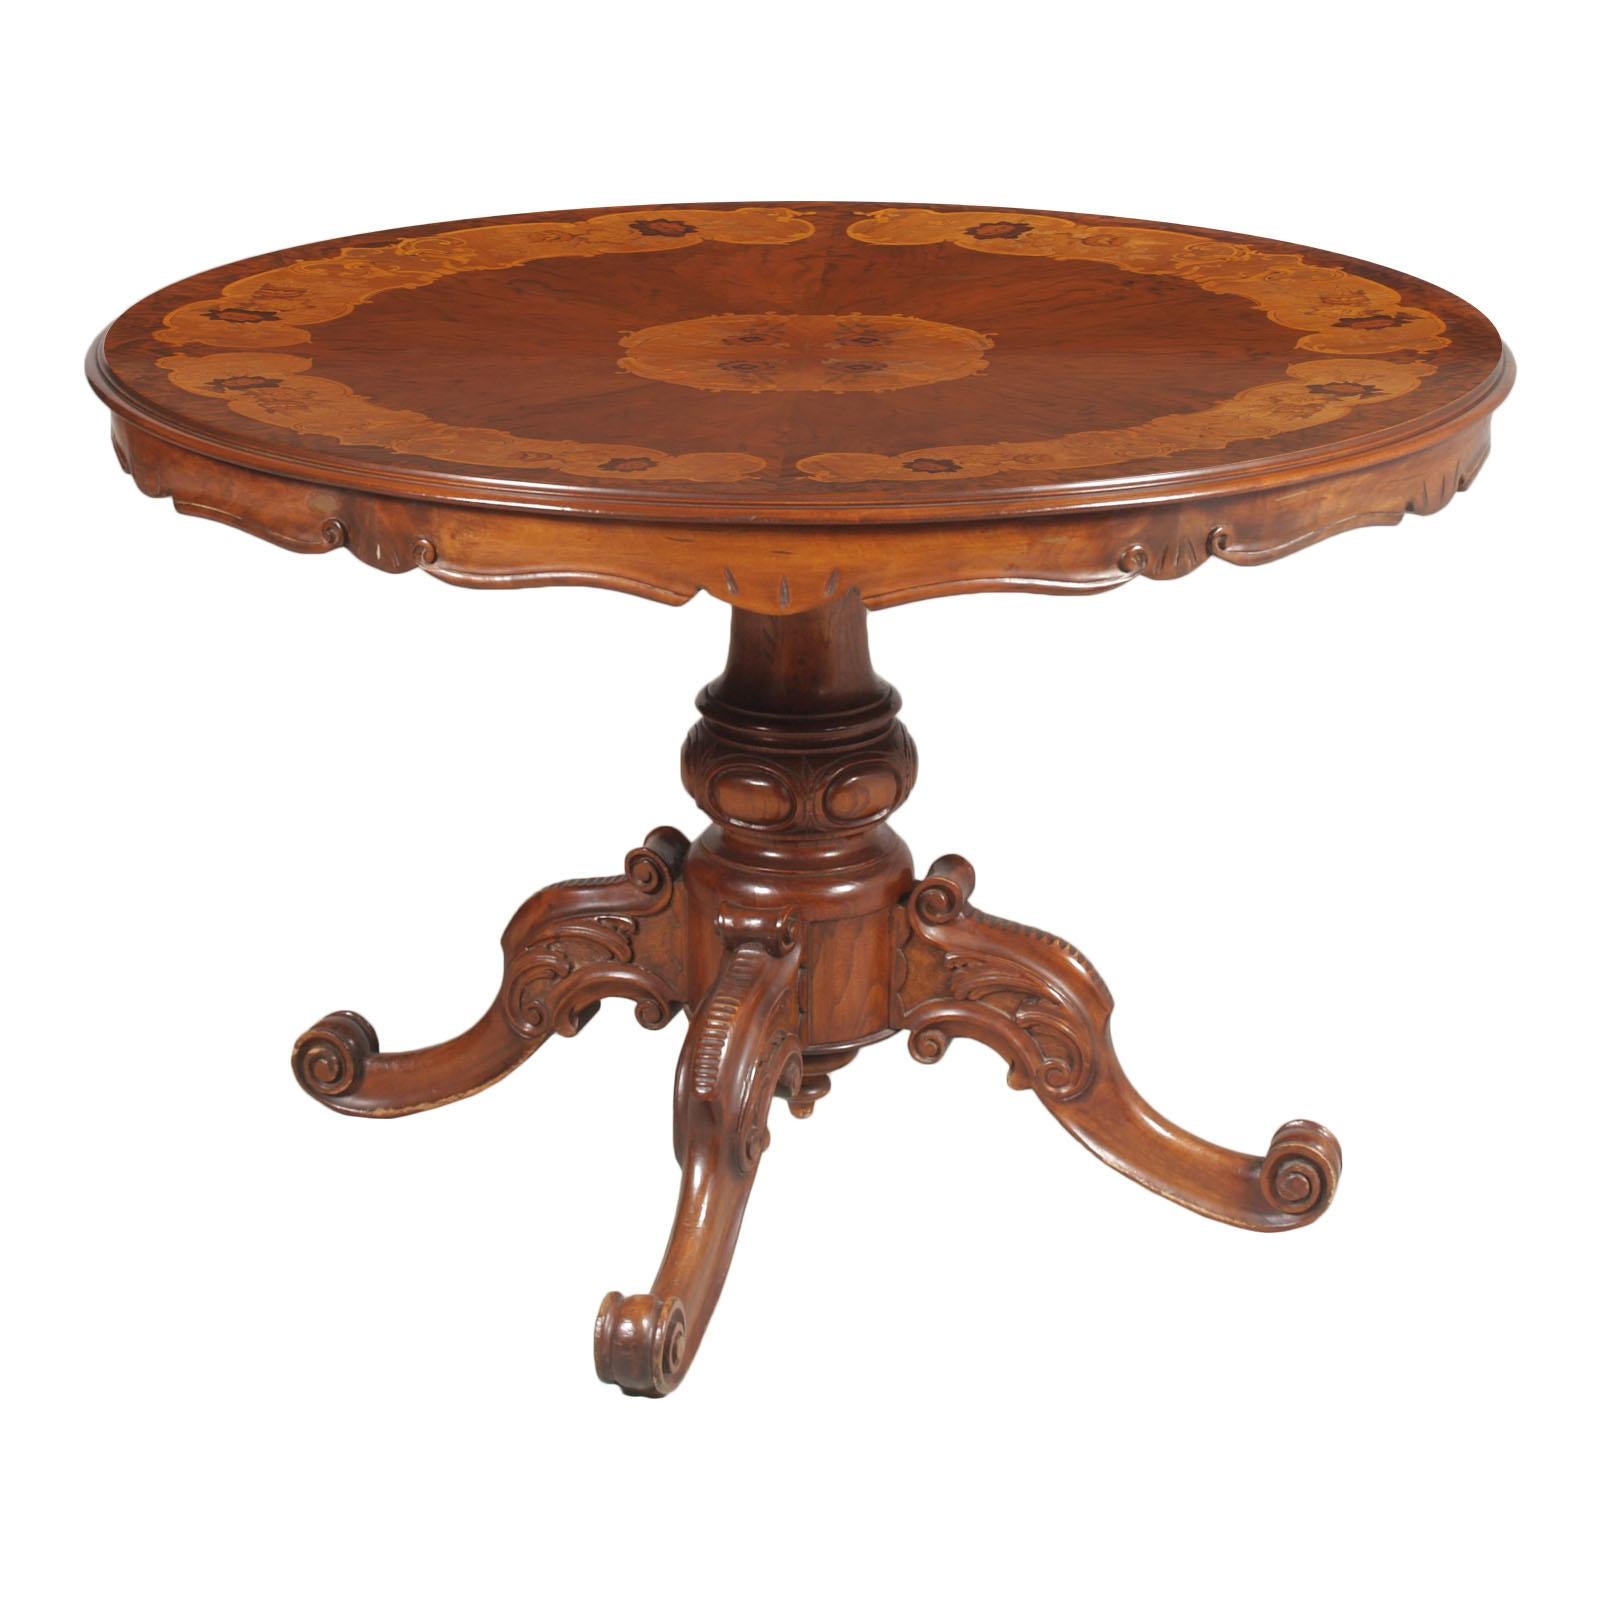 Exquisite refined Baroque Revival Sorrento inlaid and carved walnut round table with six baroque walnut chairs, hand carved.
Artistic inlay with various essences of fruit wood
We can sell the table separately from the chairs.

Measures table cm: